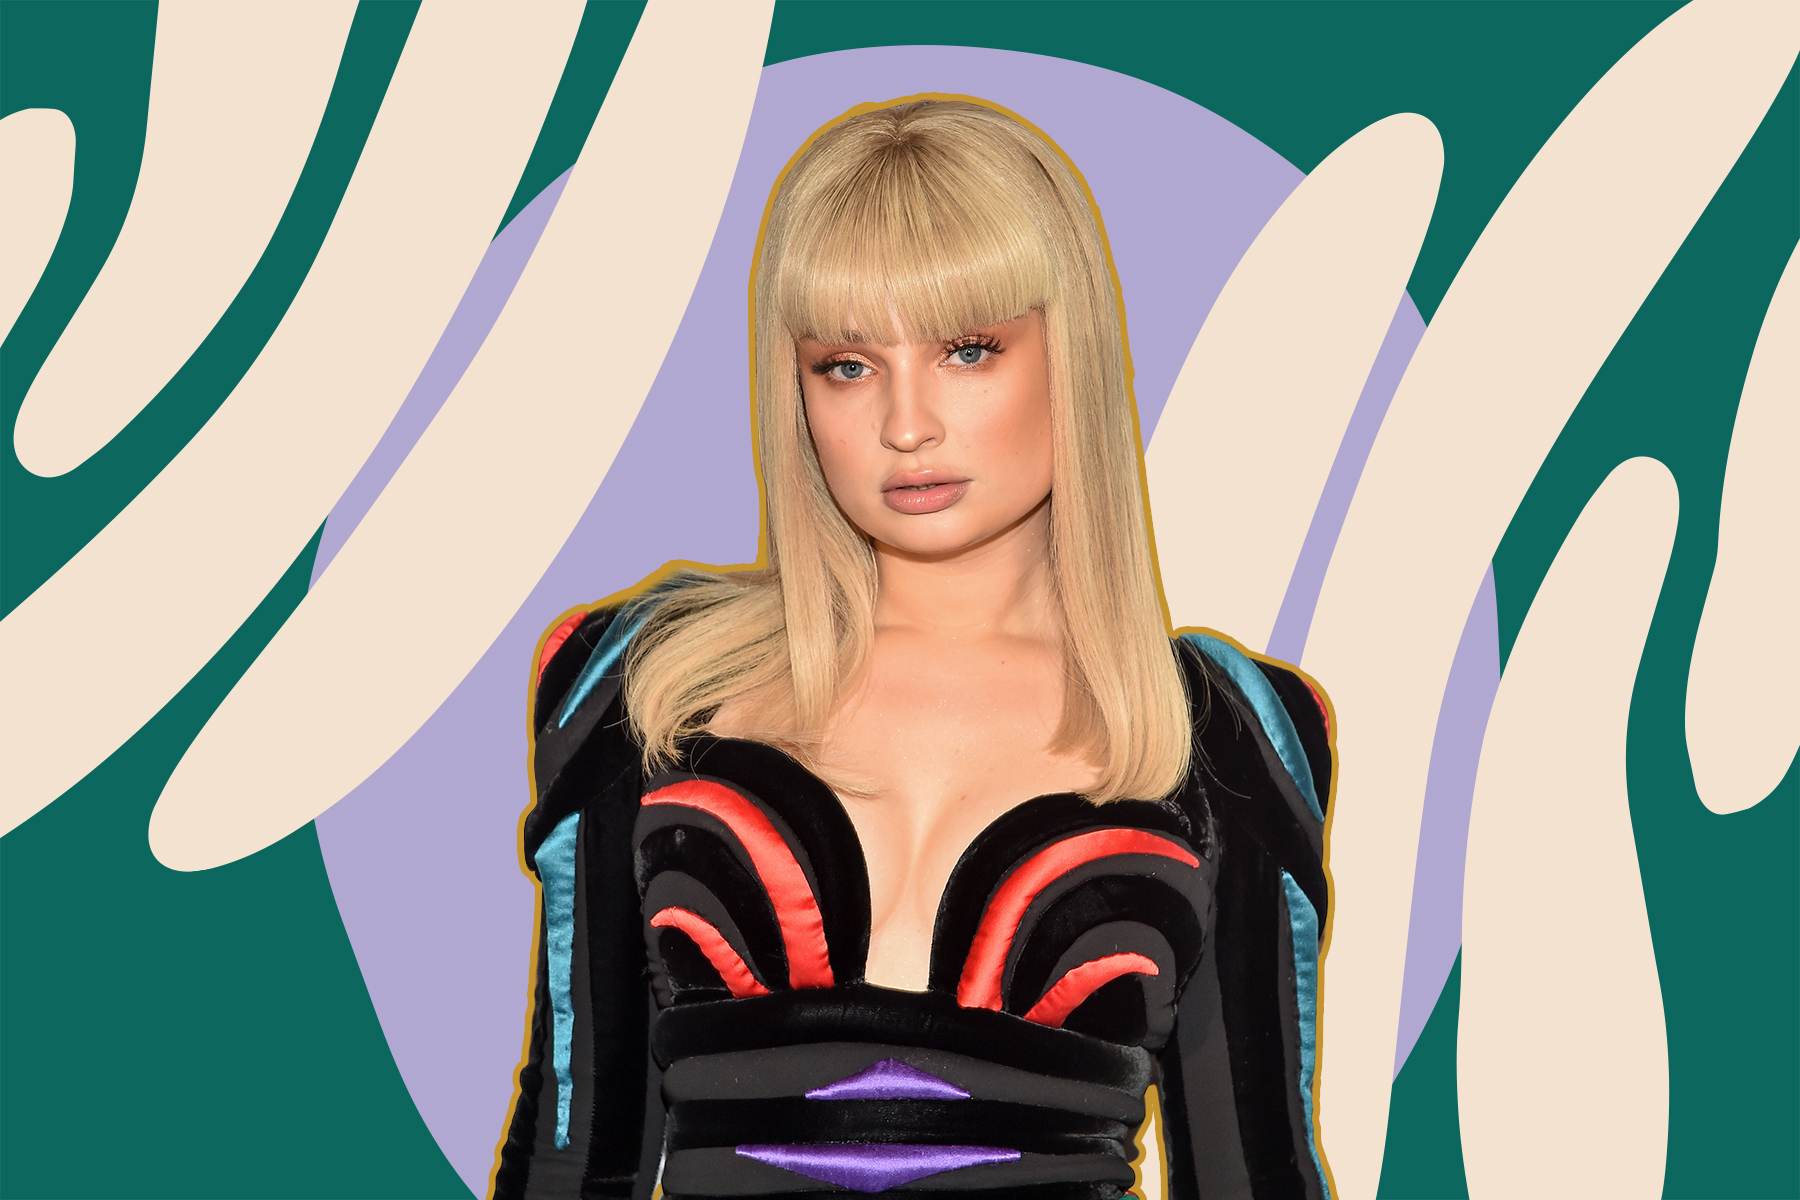 Heres How Kim Petras Keeps Her Blonde Hair Bright and HealthyHelloGiggles